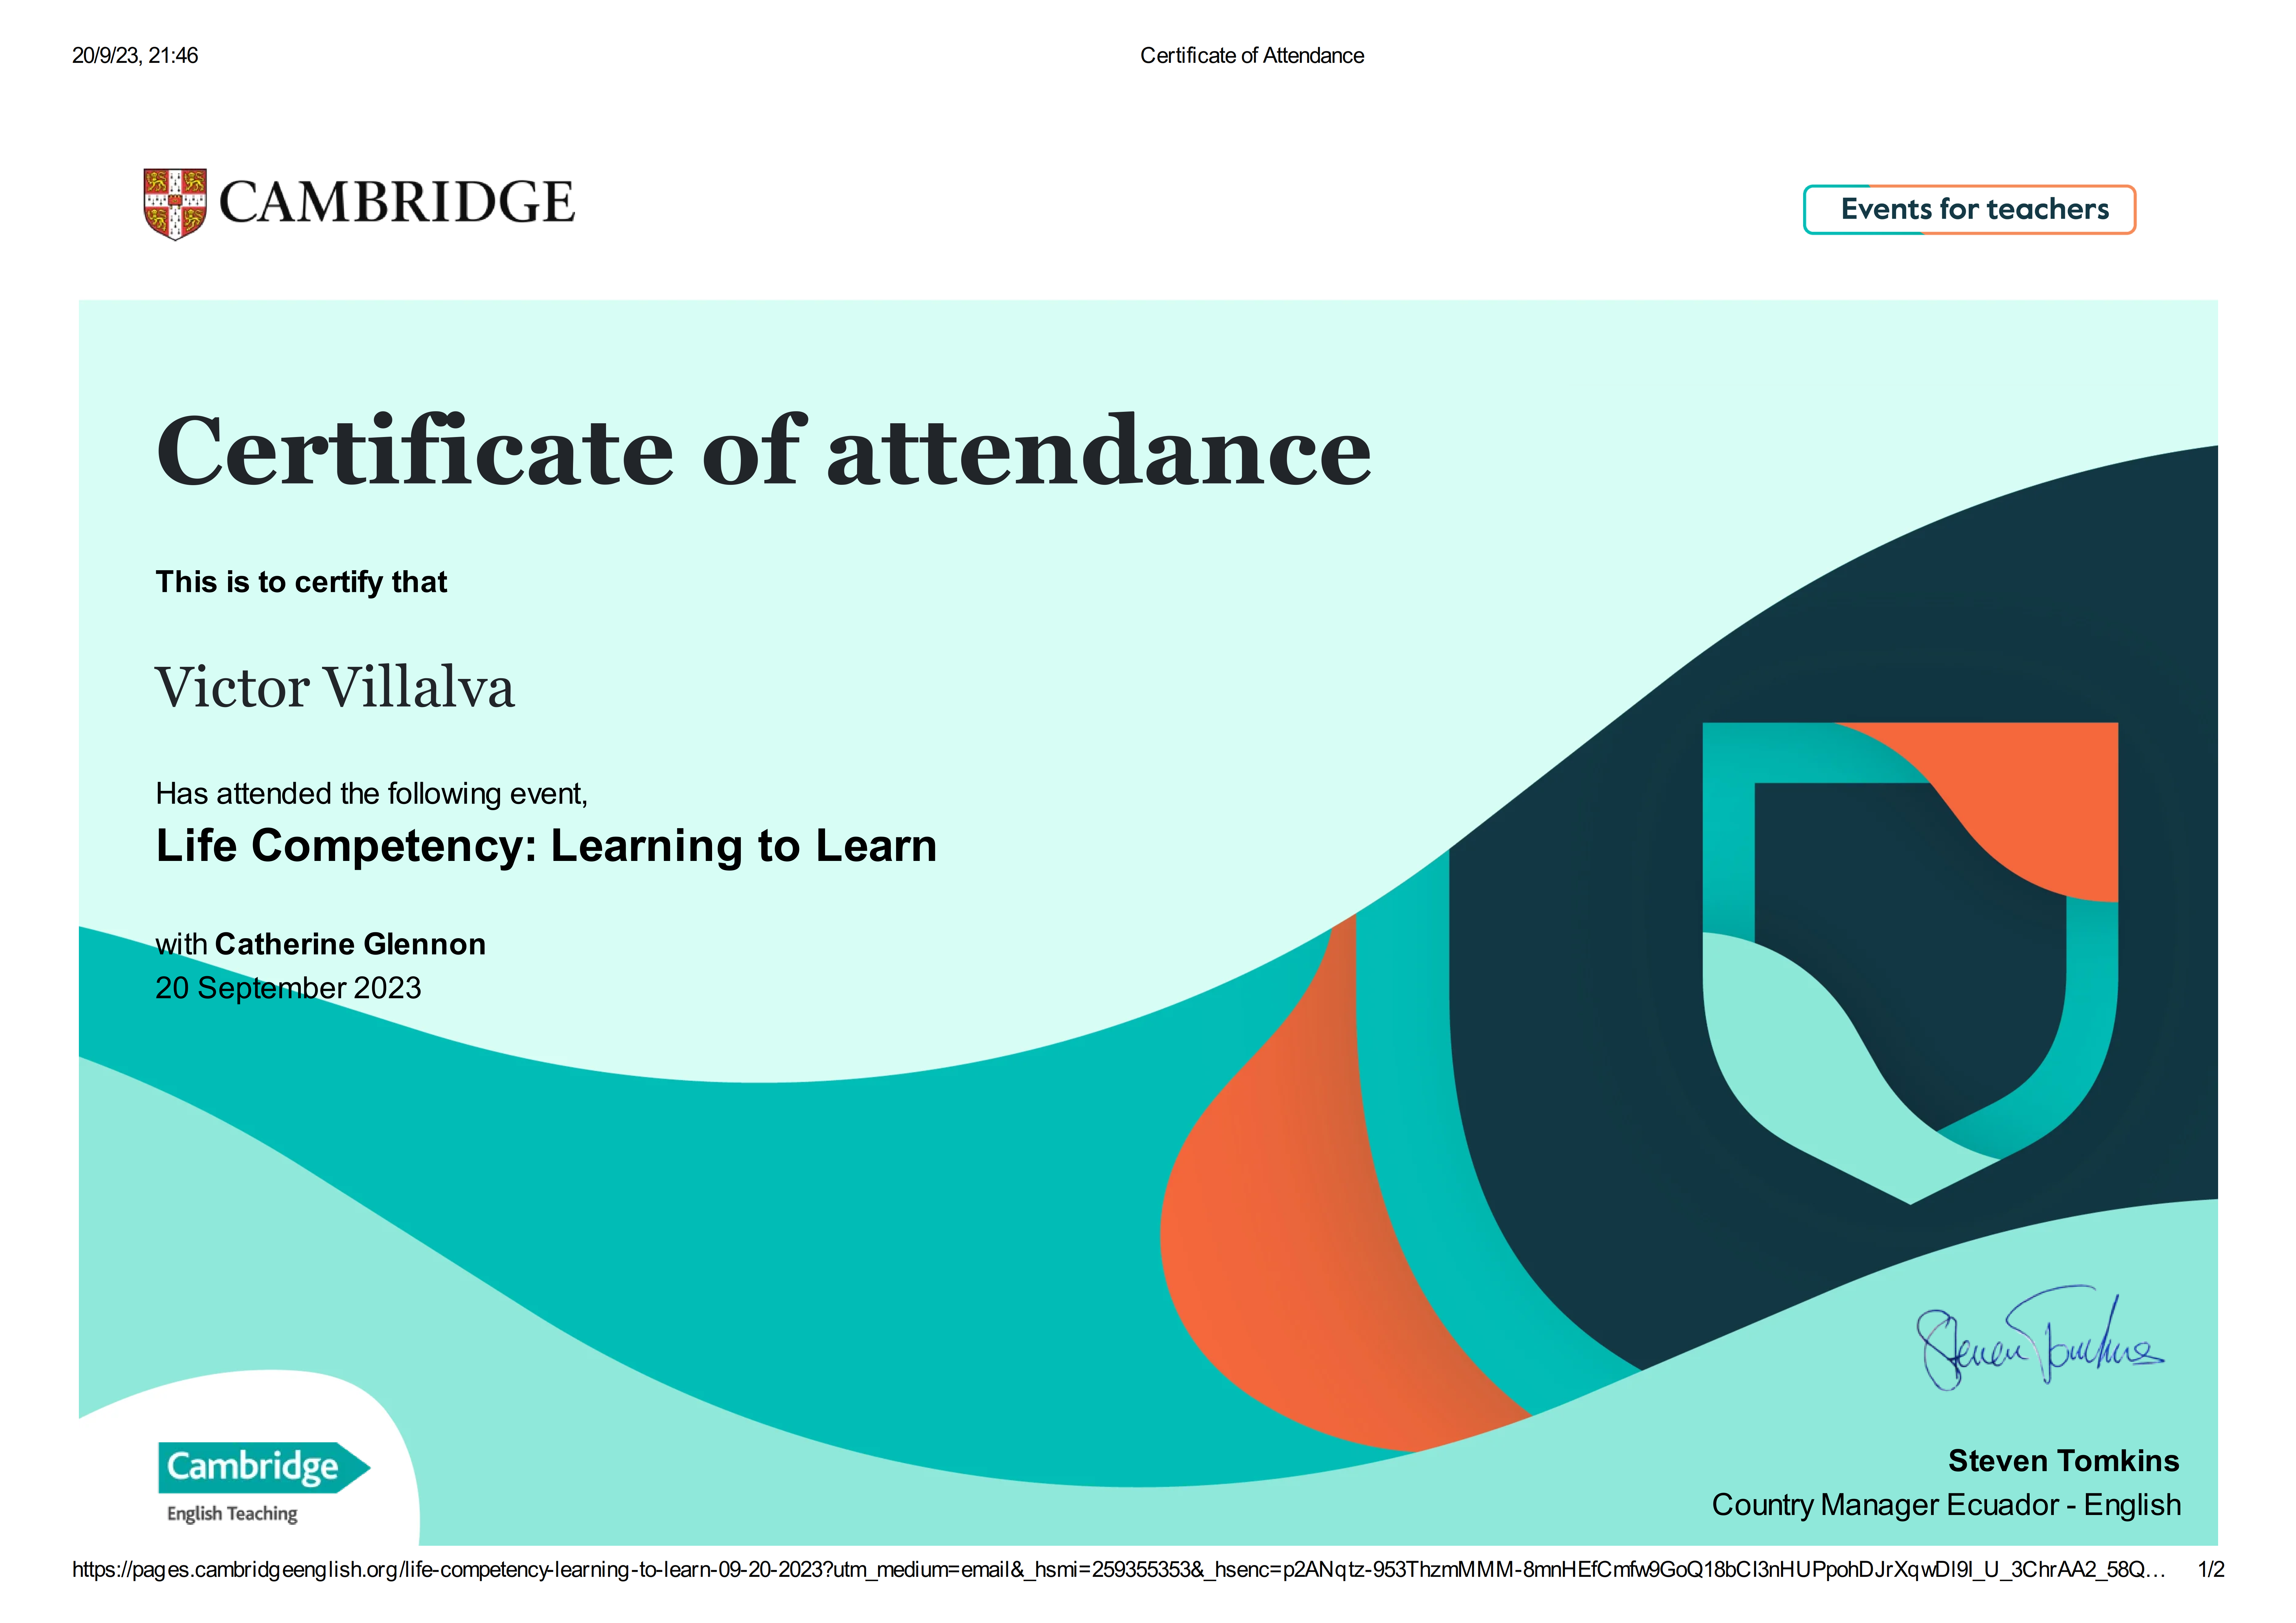 20/9/23, 21:46 Certificate of Attendance

 

. ns CAMBRIDGE | Events for teachers ]

 

 

Certificate of attendance

  
  
 
 
 
 
       

This is to certify that

Victor Villalva

Has attended the following event,
Life Competency: Learning to Learn

vith Catherine Glennon
mber 2023

Qu ck.
Steven Tomkins

English Teaching Country Manager Ecuador - English

   

https://pages.cambridgeenglish.org/life-competency-learning-to-learn-09-20-2023?utm_medium=email&amp; hsmi=259355353&amp; hsenc=p2ANqtz-953ThzmMMM-8mnHEfC mwiGoQ18bCI3nHUPpohDJrXgwDI9l_U 3ChrAA2 58Q... 1/2